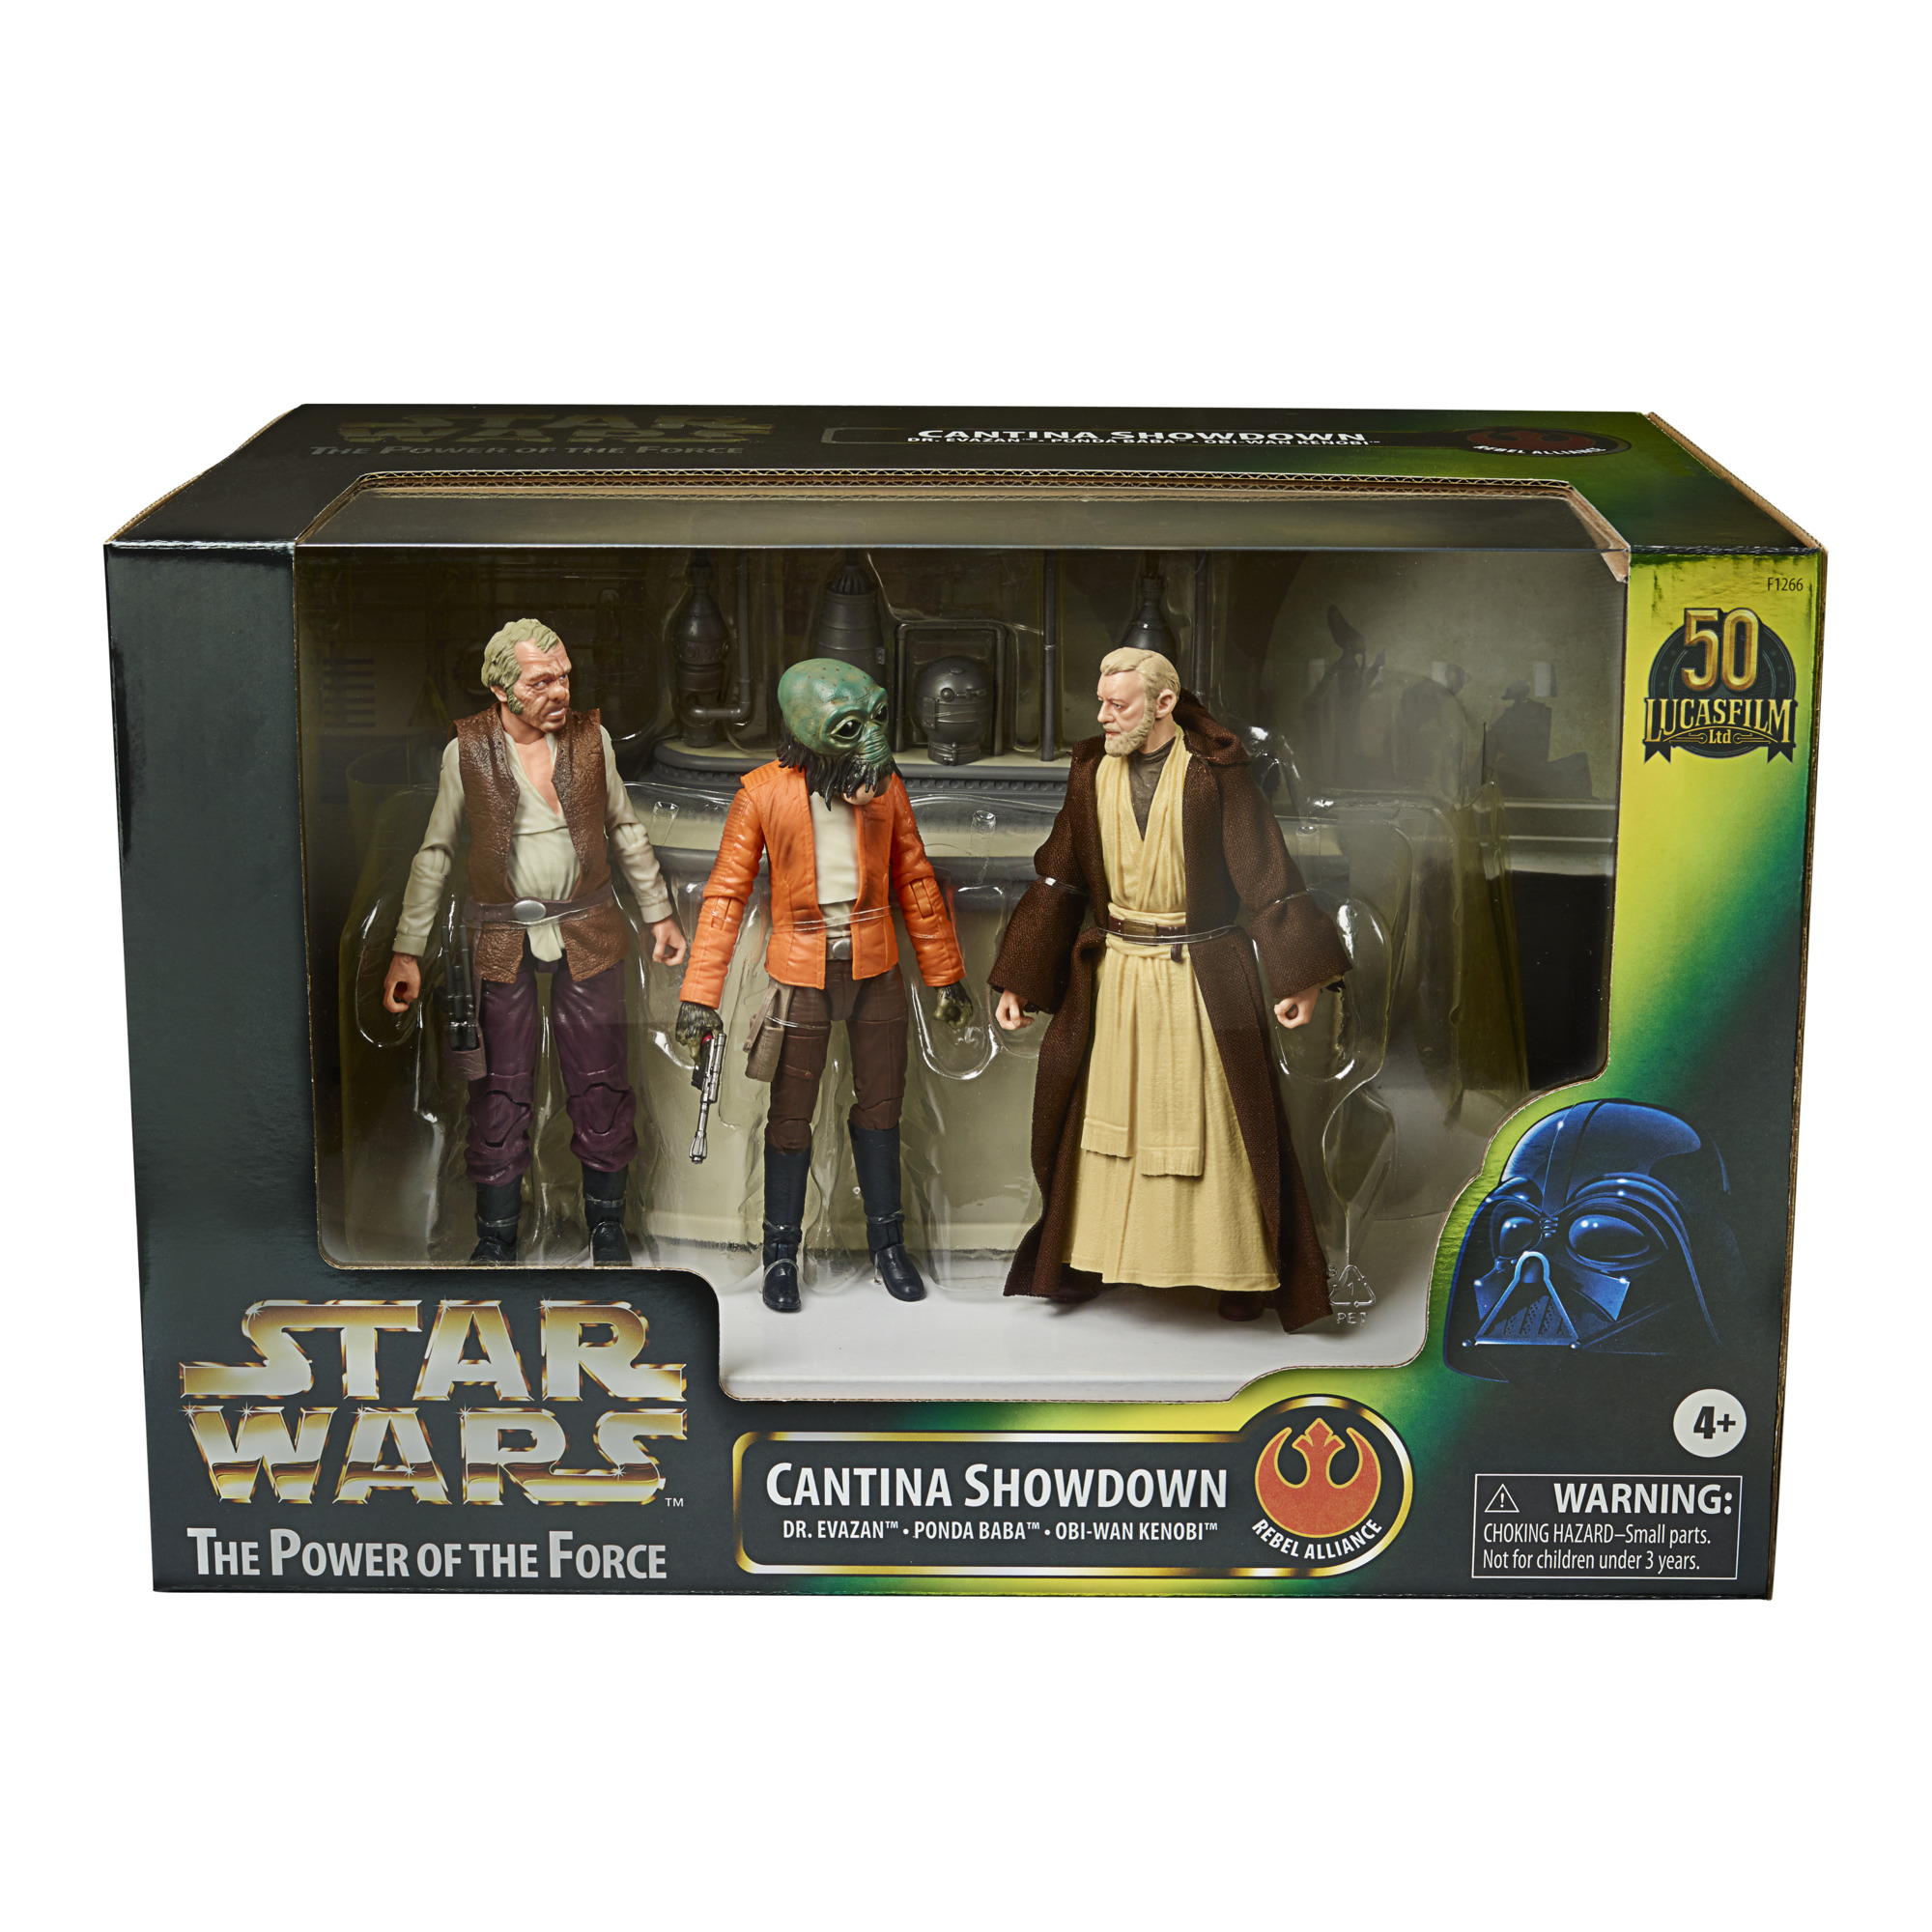 STAR-WARS-THE-BLACK-SERIES-THE-POWER-OF-THE-FORCE-CANTINA-SHOWDOWN-Playset-in-pck-2